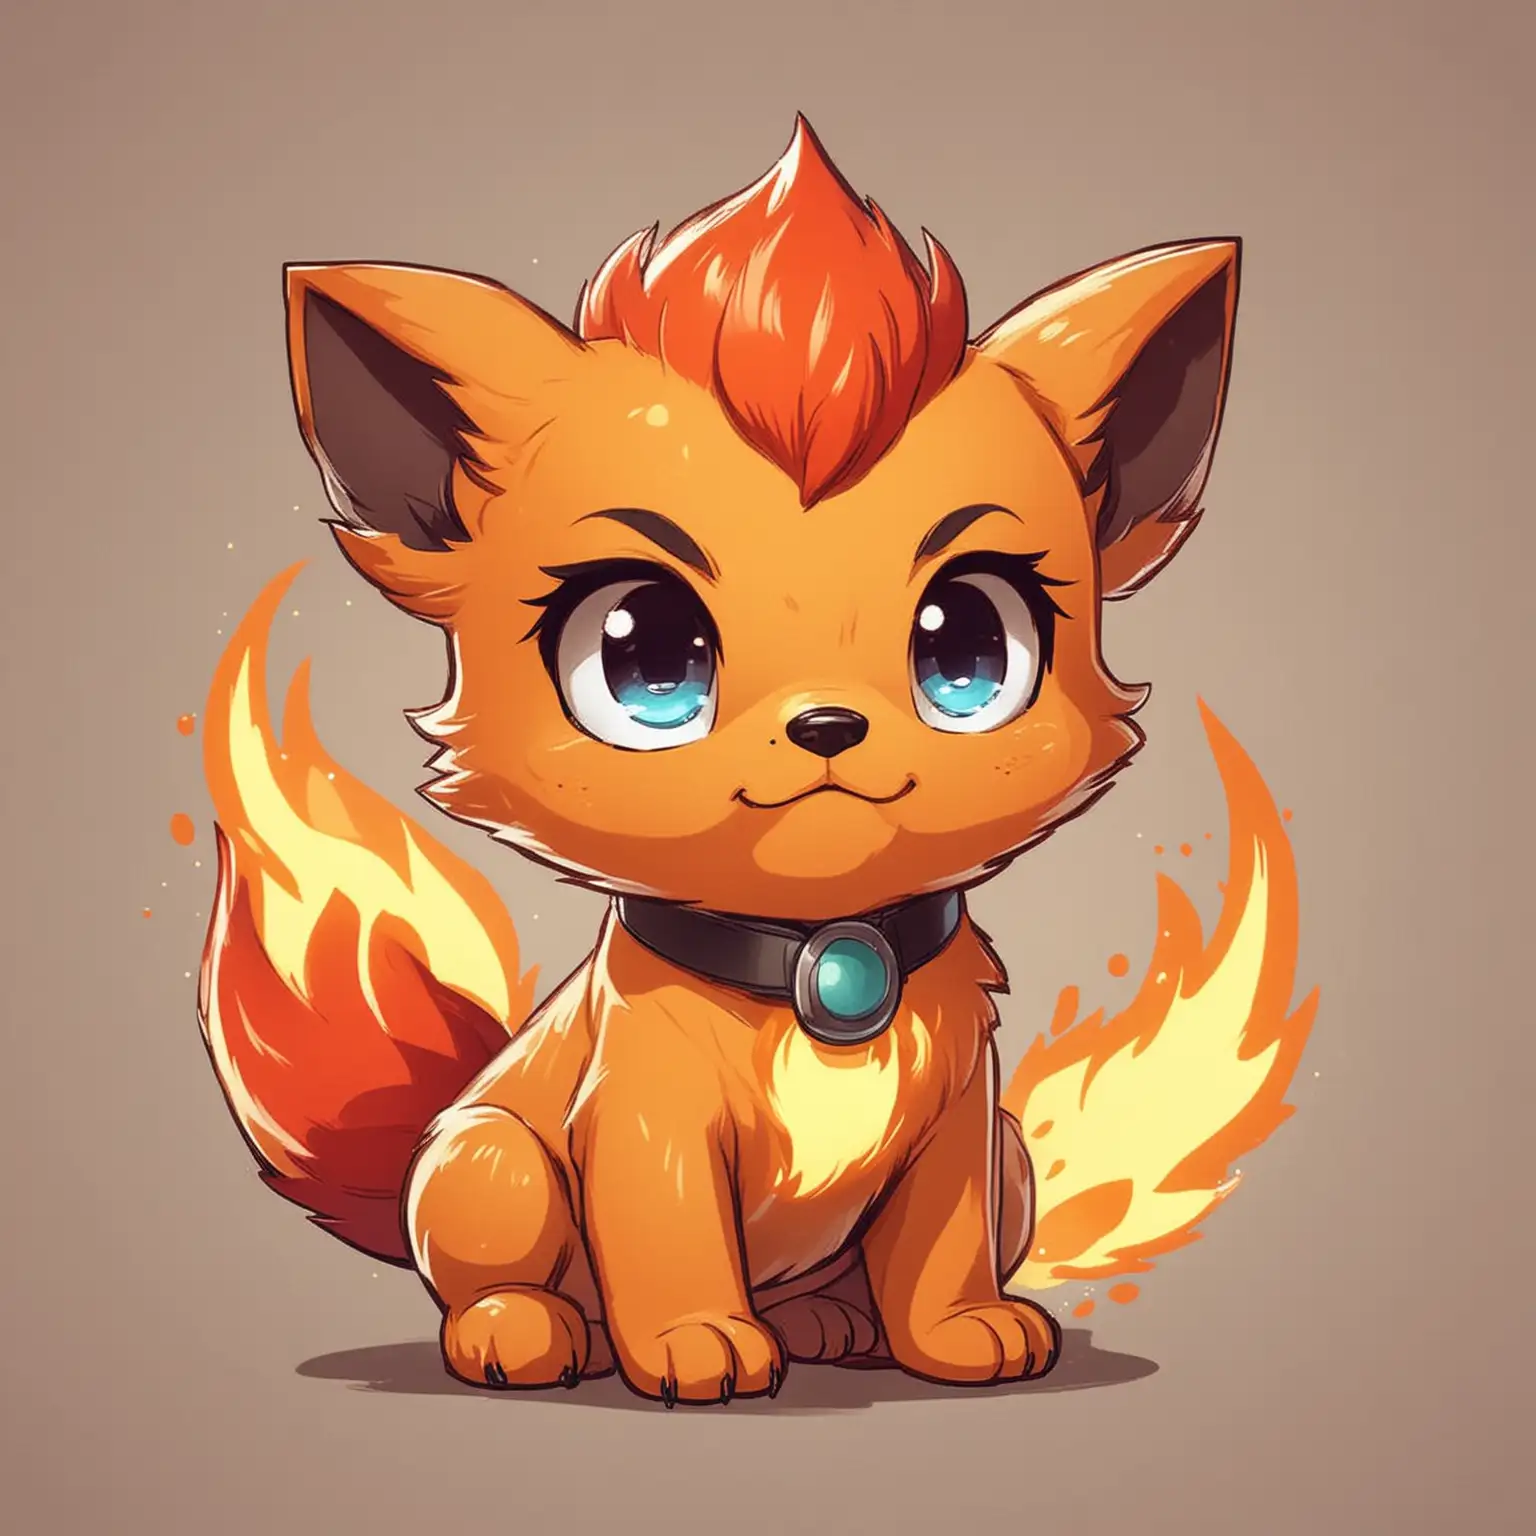 Cartoon Angry Fire Puppy in Pokemon Style Full Length